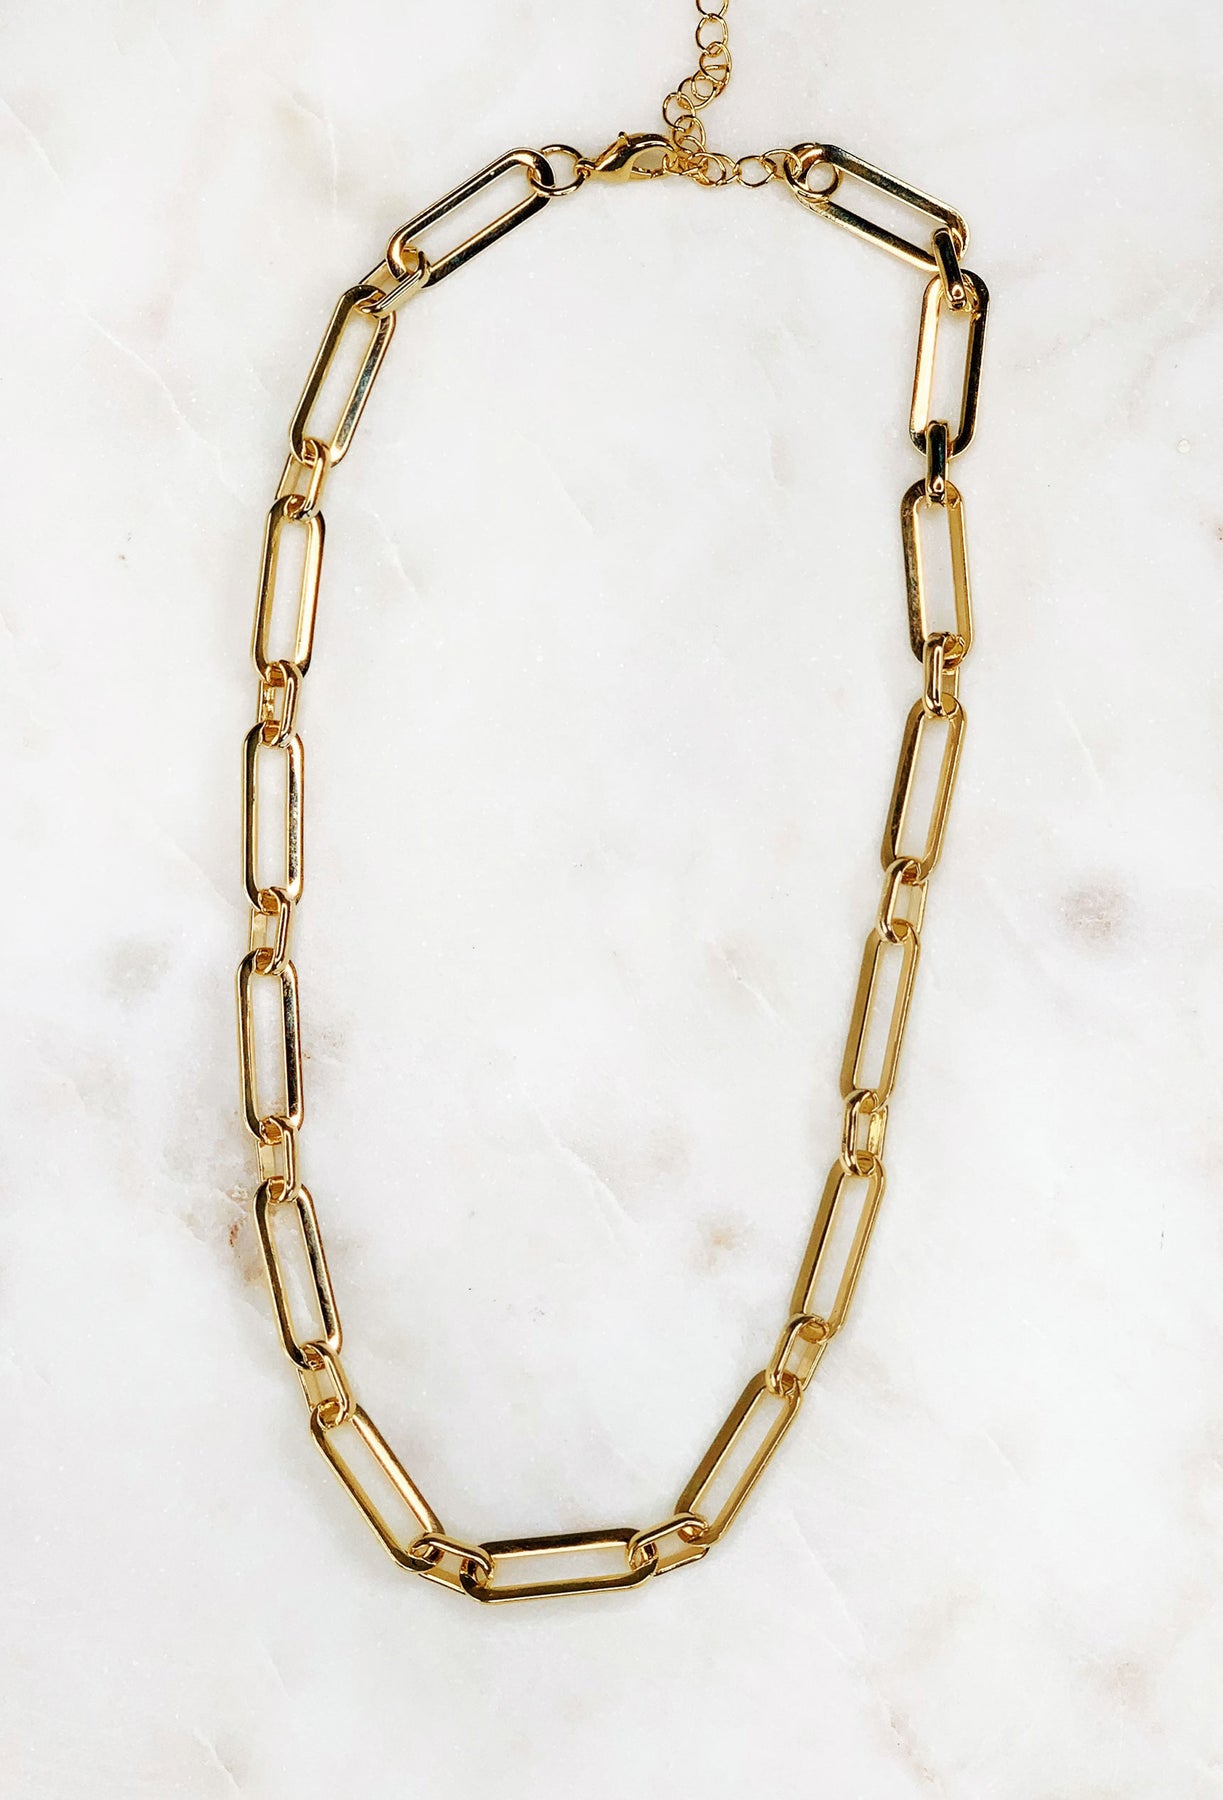 Metallic Chain Rectangle Link (suitable For Bag Accessories) | Size18mm(w)  1meter at Rs 177.00 | Stainlss Steel Link Chain, चेन लिंक - Satra Traders,  Mumbai, Mumbai | ID: 25385587355